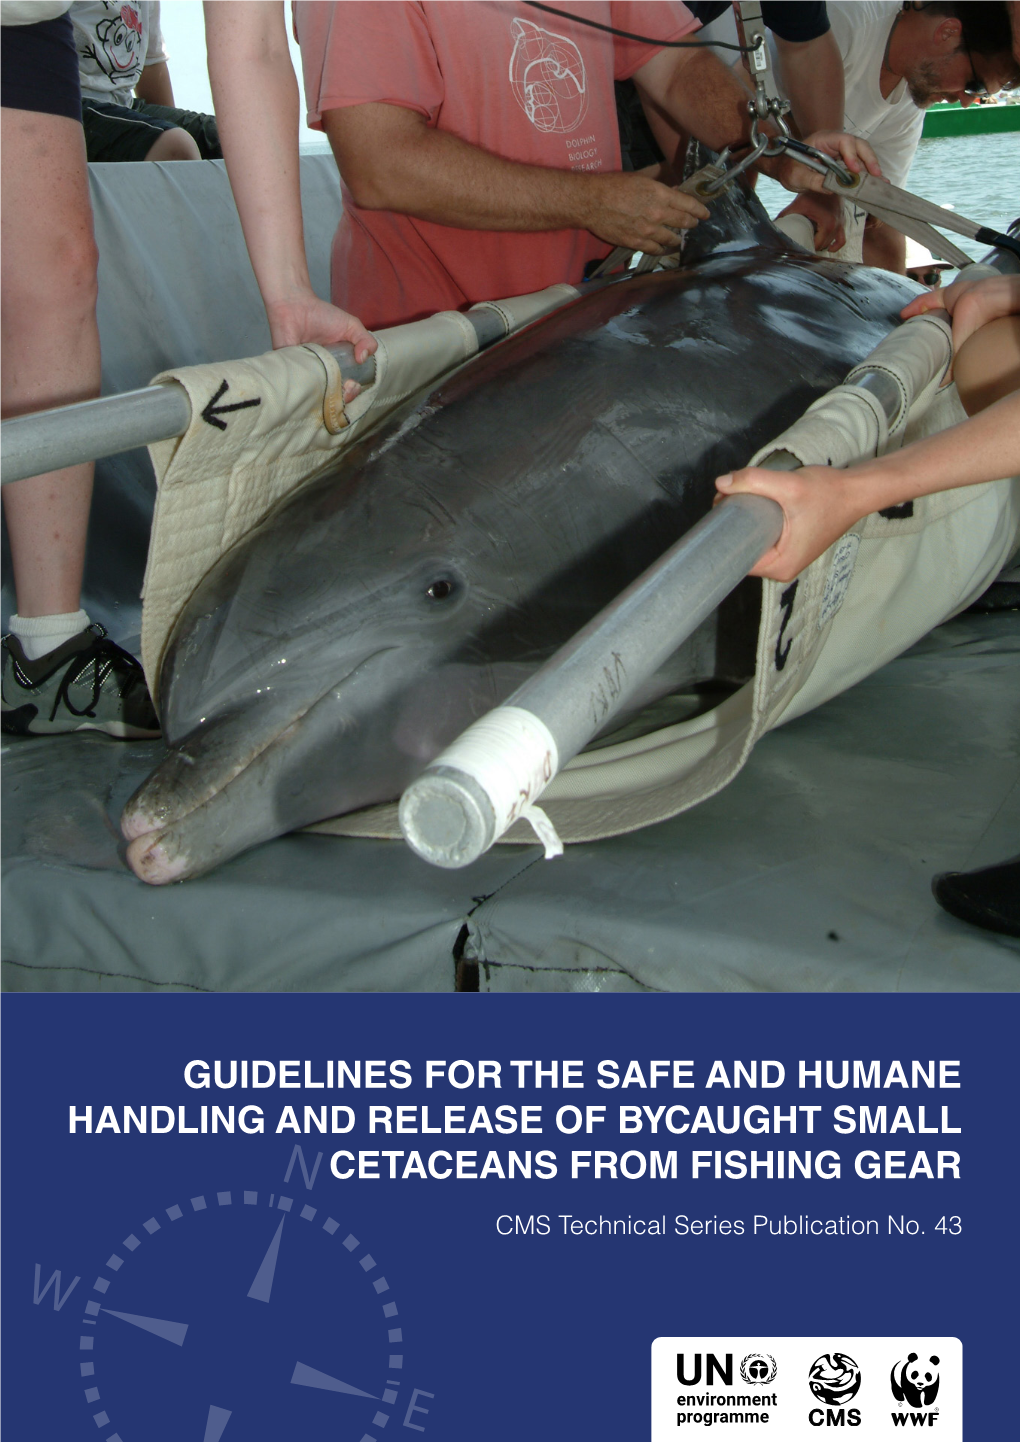 Guidelines for the Safe and Humane Handling and Release of Bycaught Small Cetaceans from Fishing Gear 1